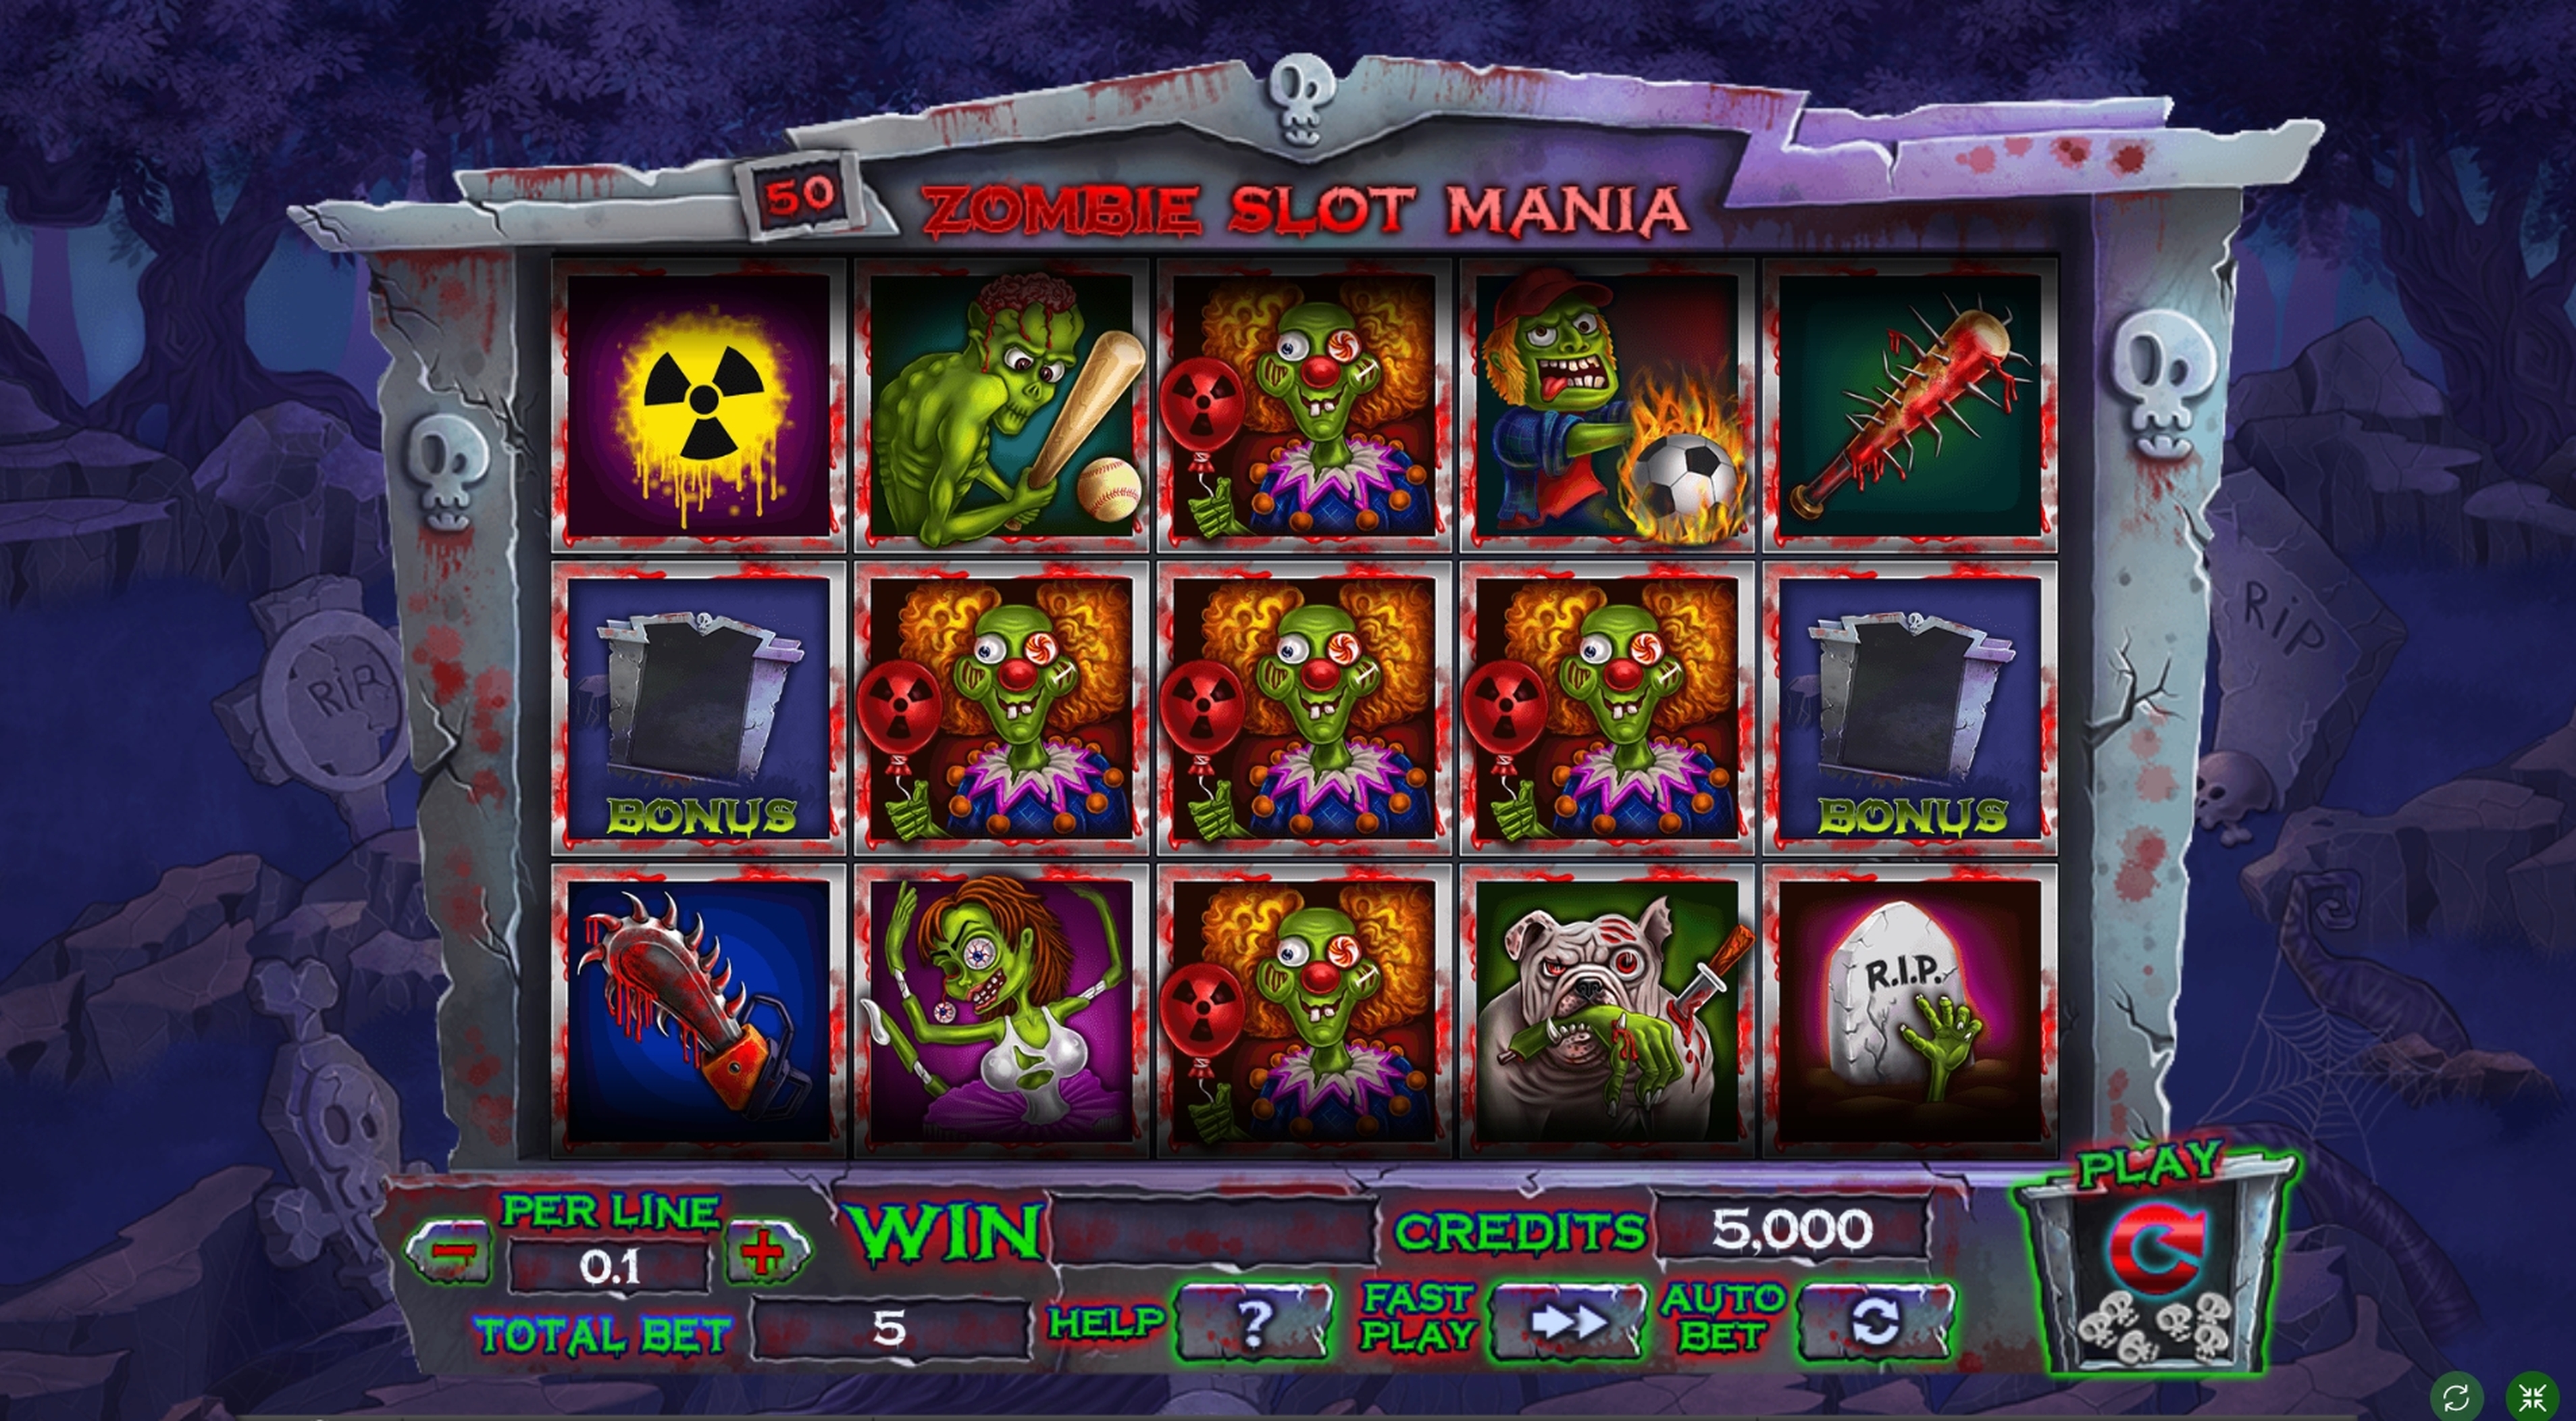 Reels in Zombie slot mania Slot Game by Spinomenal